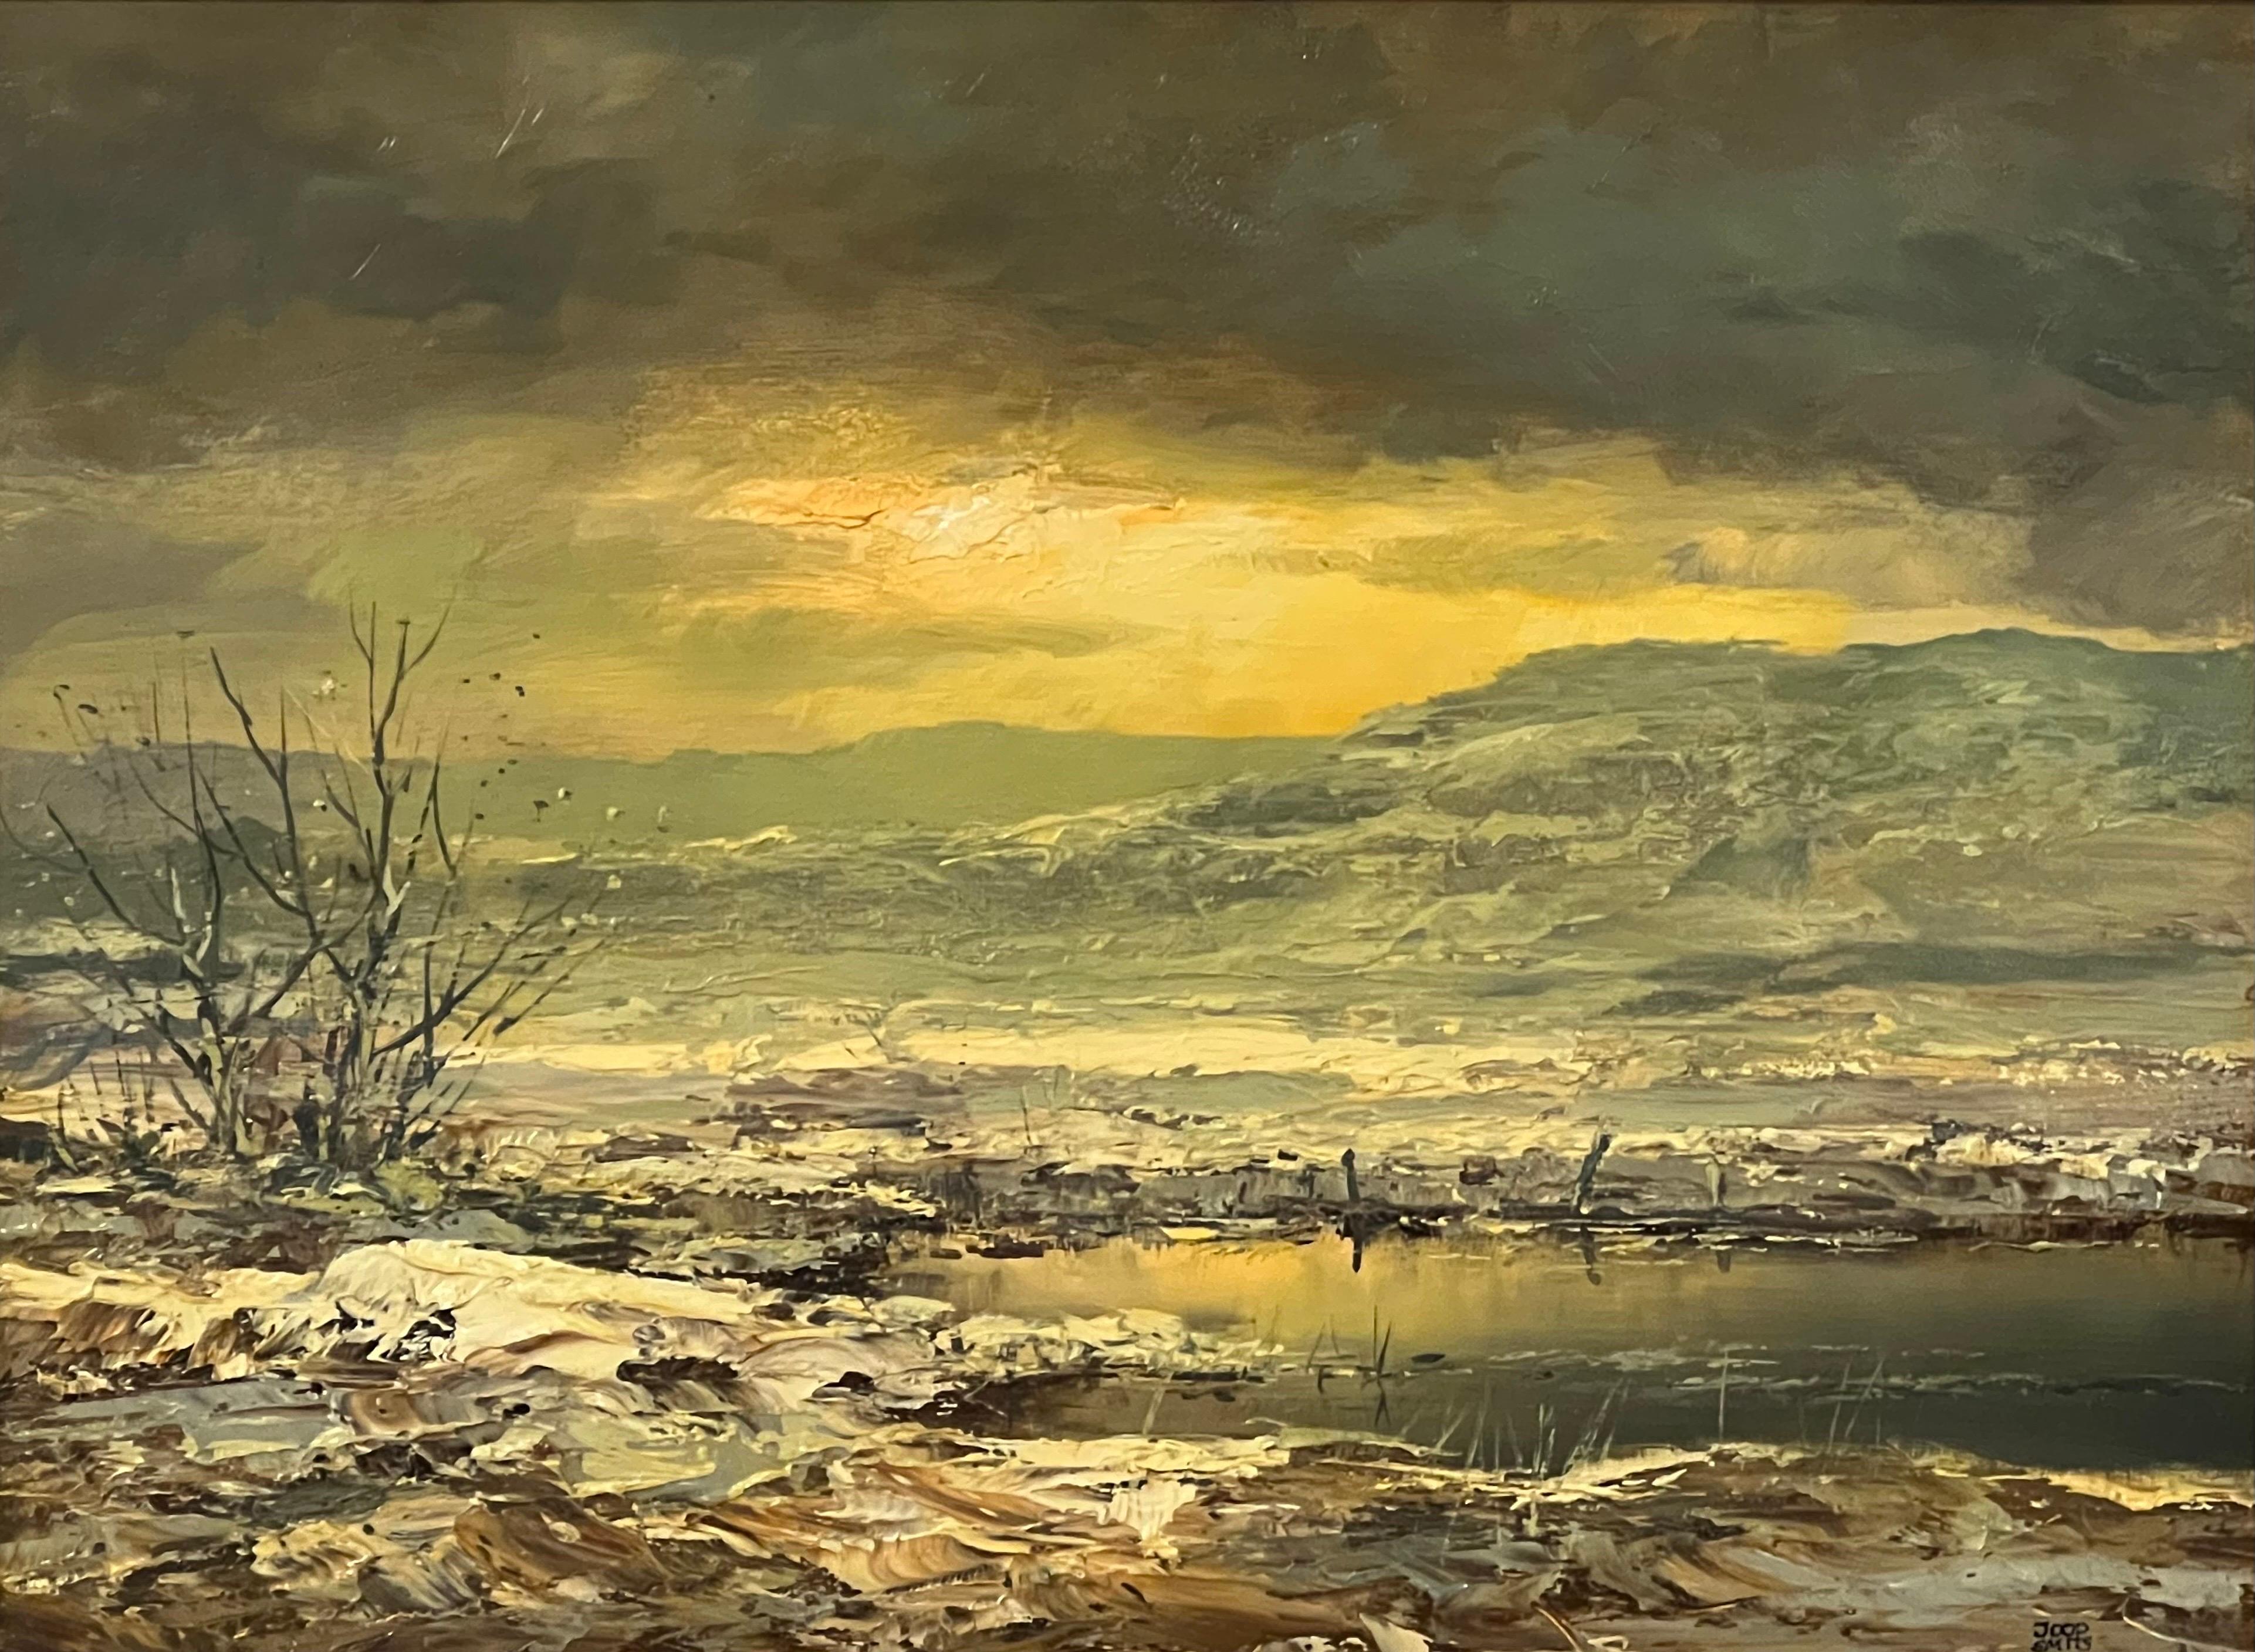 Oil Painting of the Winter Sunshine with Mountain Lake by 20th Century Dutch Artist, Joop Smits (1938-2014) 

Art measures 16 x 12 inches
Frame measures 23 x 19 inches

Artist Joop Smits was born in the Netherlands in the city of Eindhoven and was